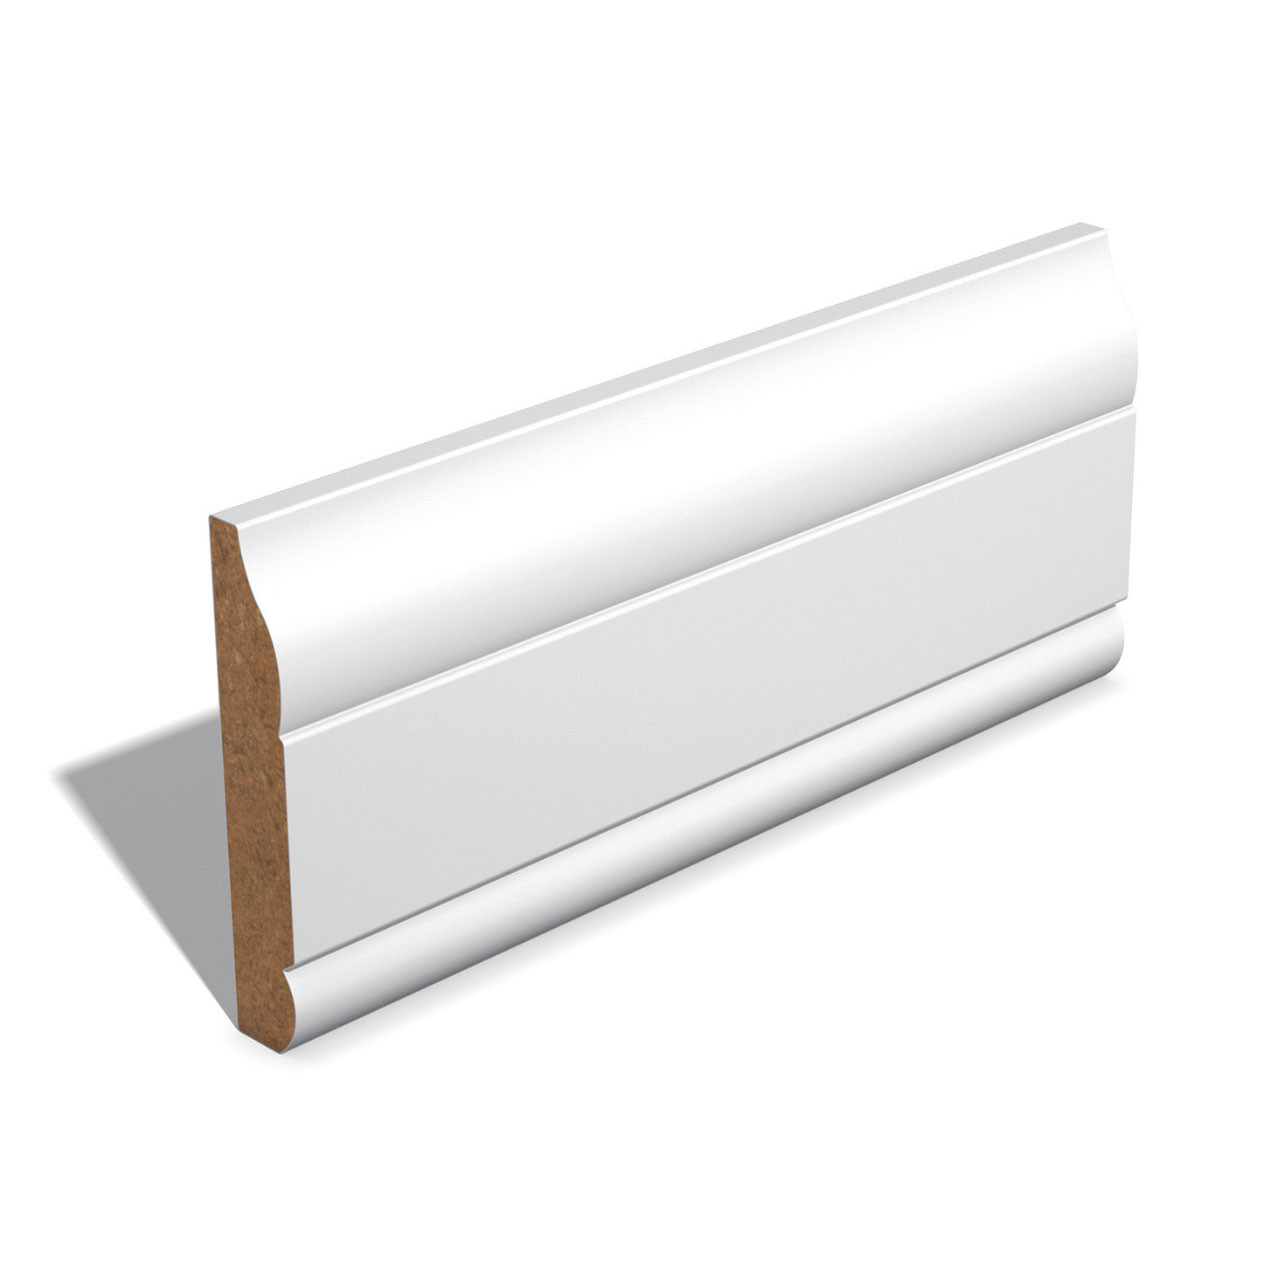 Photograph of Ogee & Bead MDF Facing Primed 14.5 x 69 x 5490mm